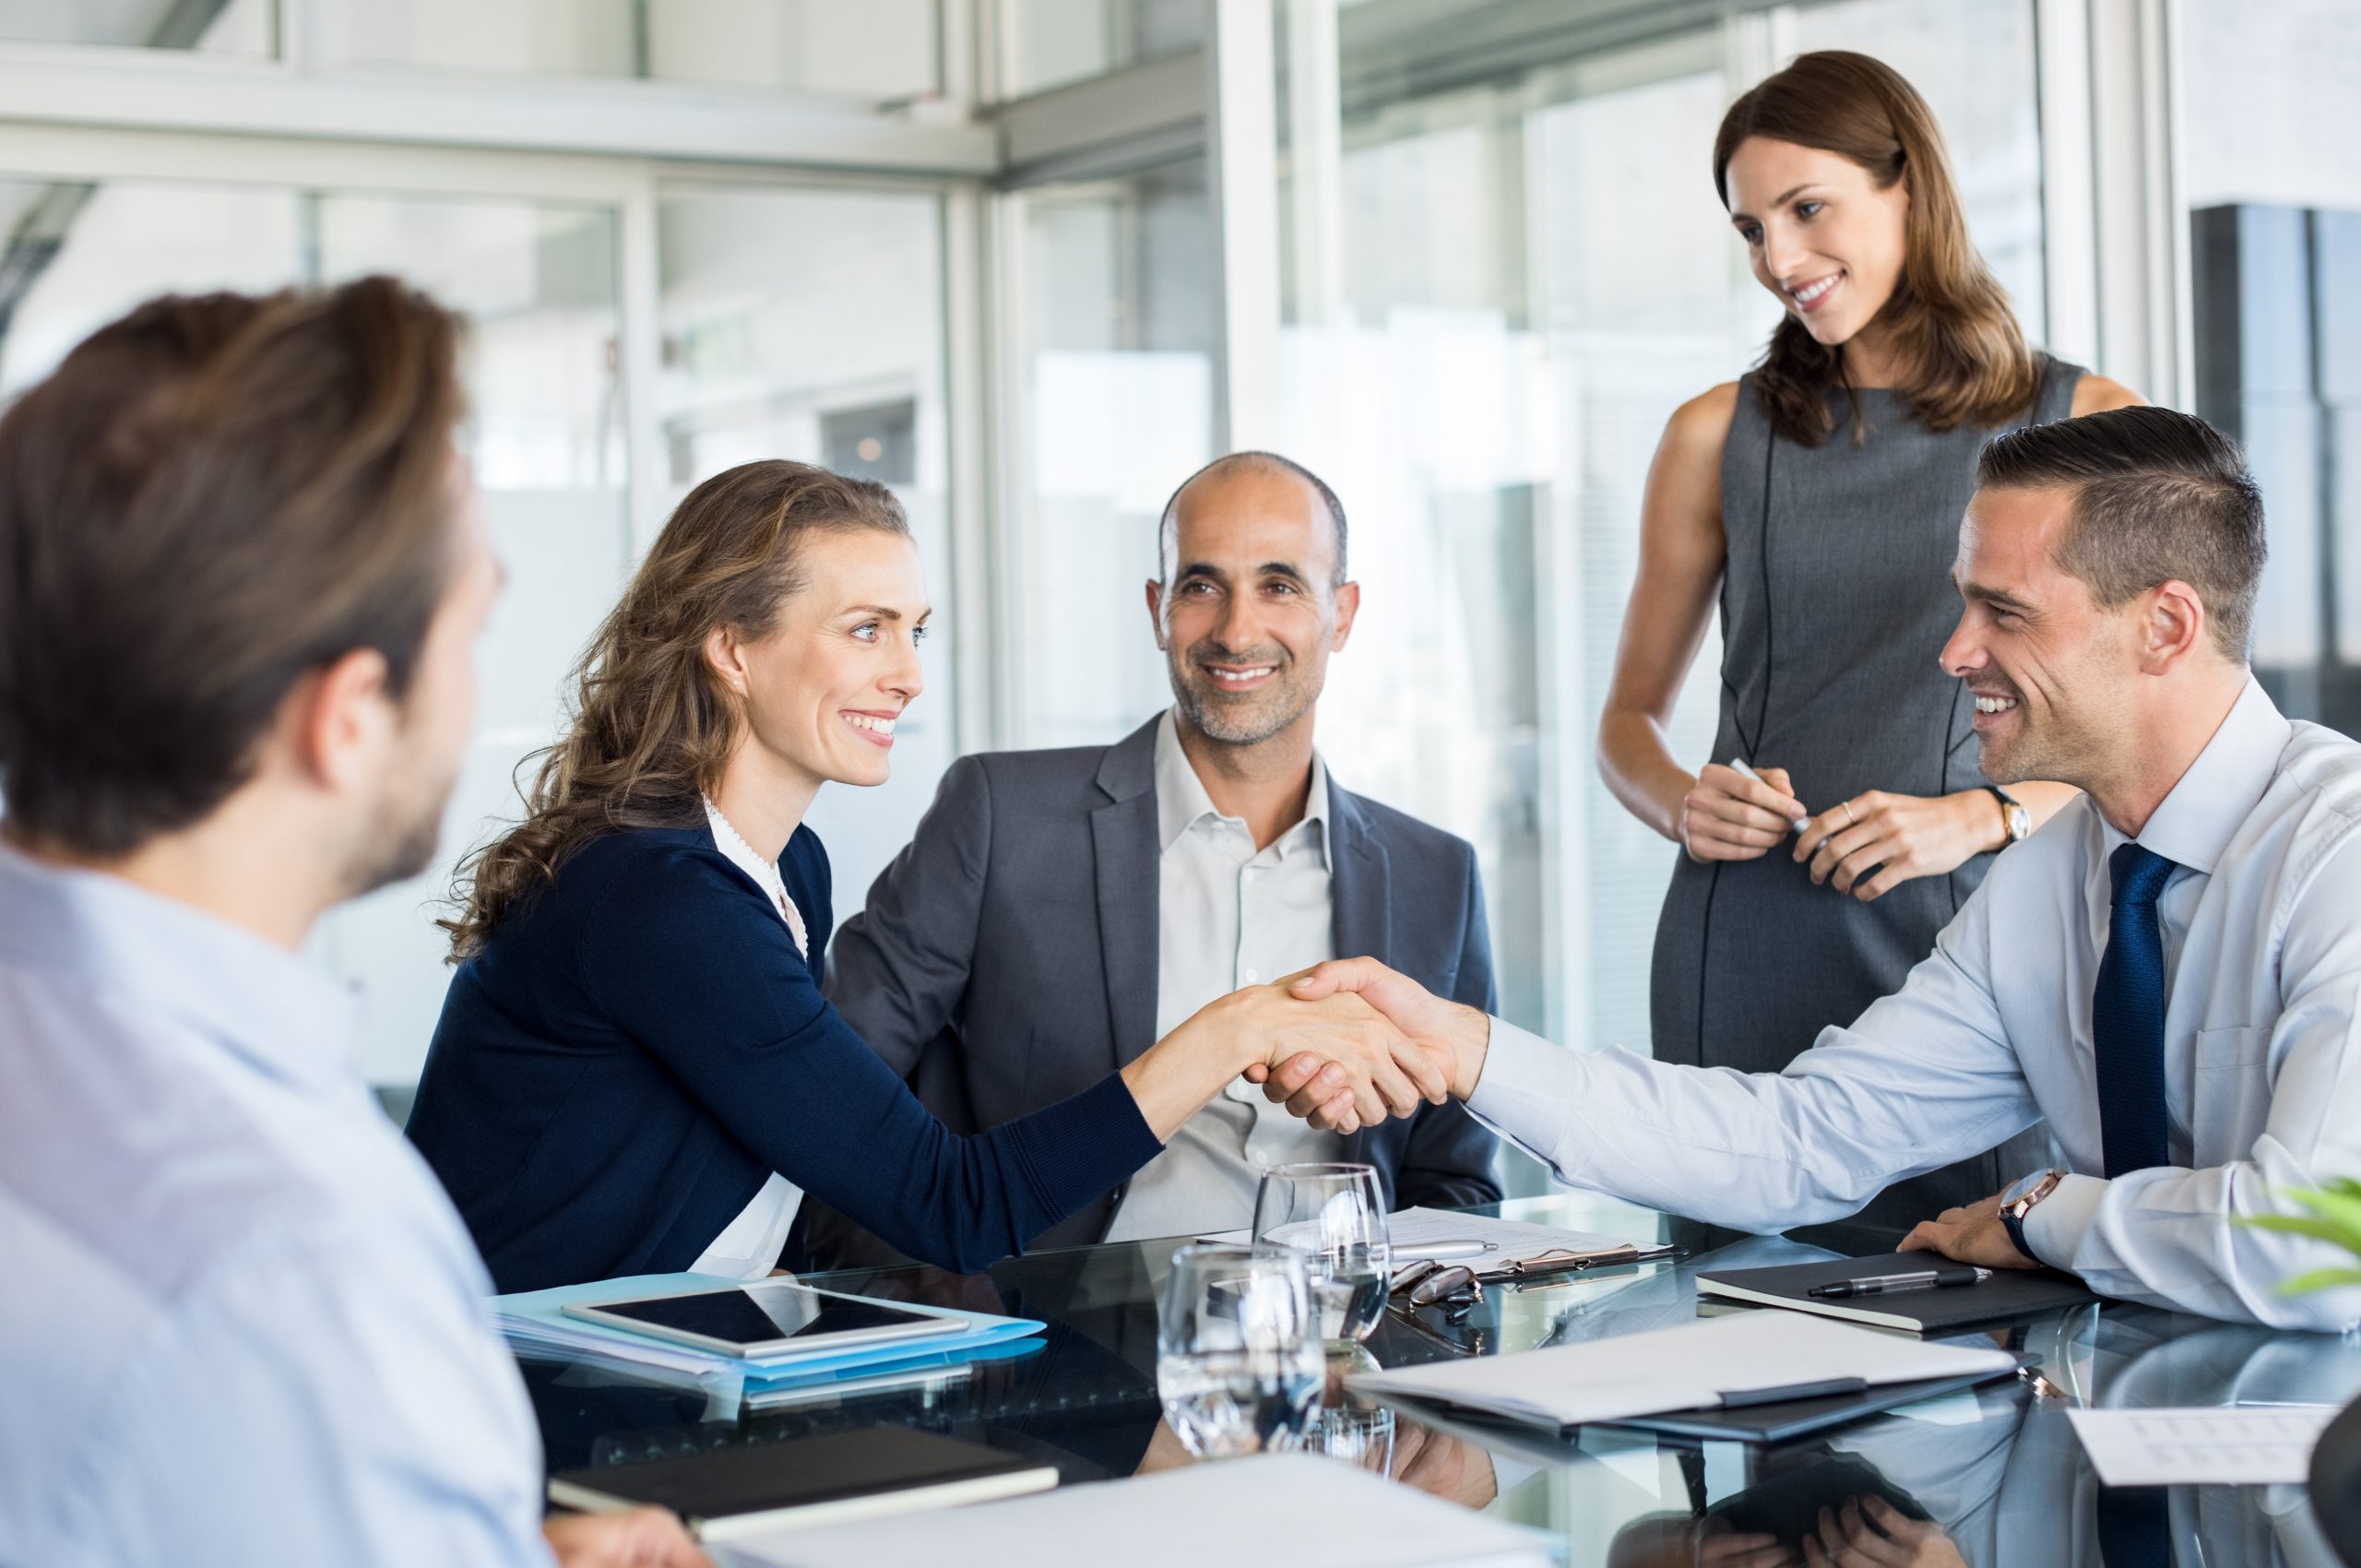 Handshake to seal a deal after a meeting. Two successful business people shaking hands in front of their colleagues. Mature businesswoman shaking hands to seal a deal with smiling businessman.